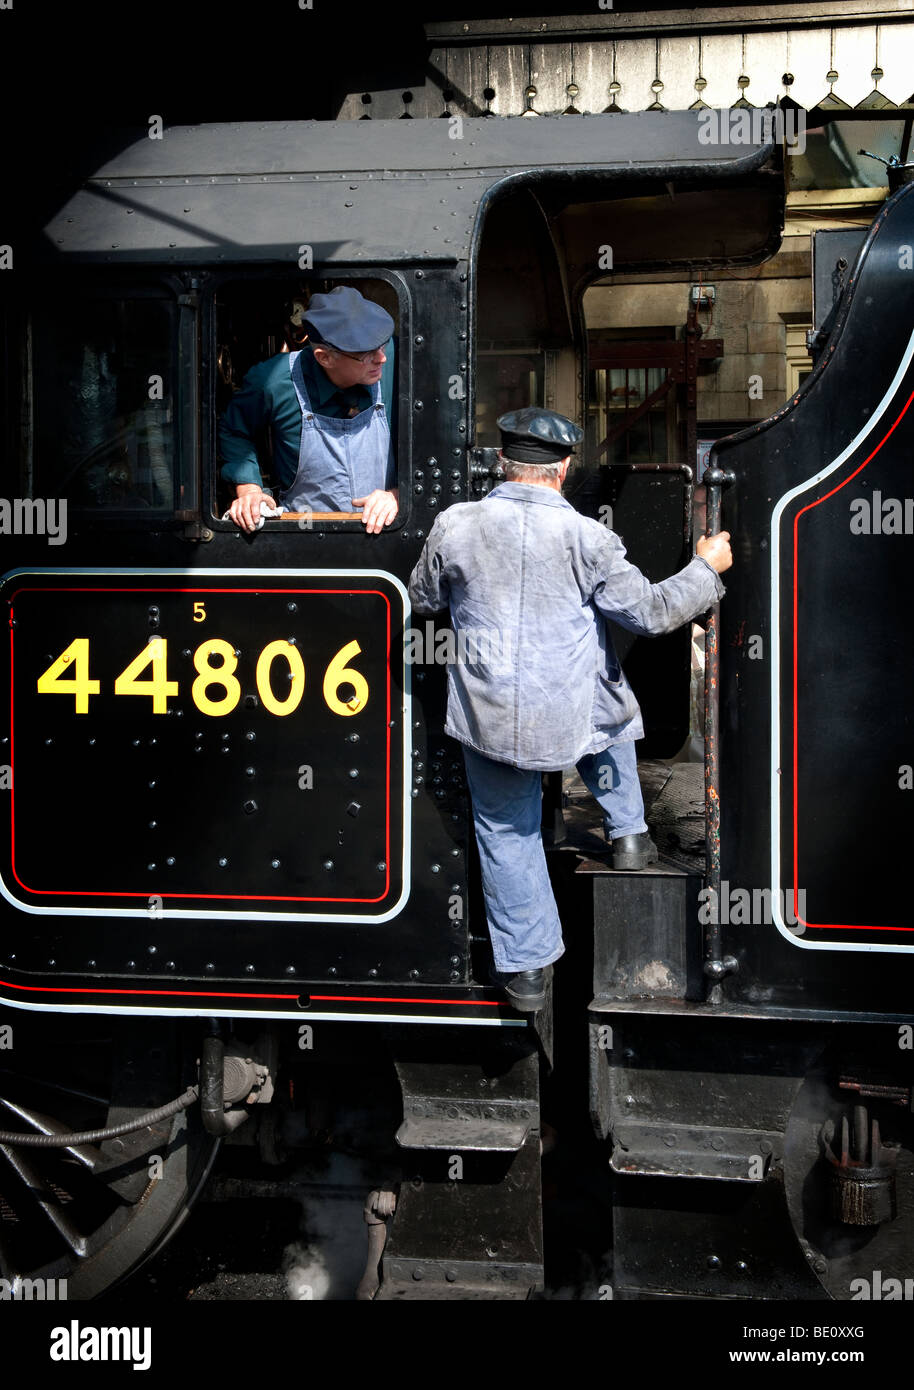 The driver and fireman on Locomotive 44806 at Llangollen Station on the Llangollen Steam Railway line Stock Photo